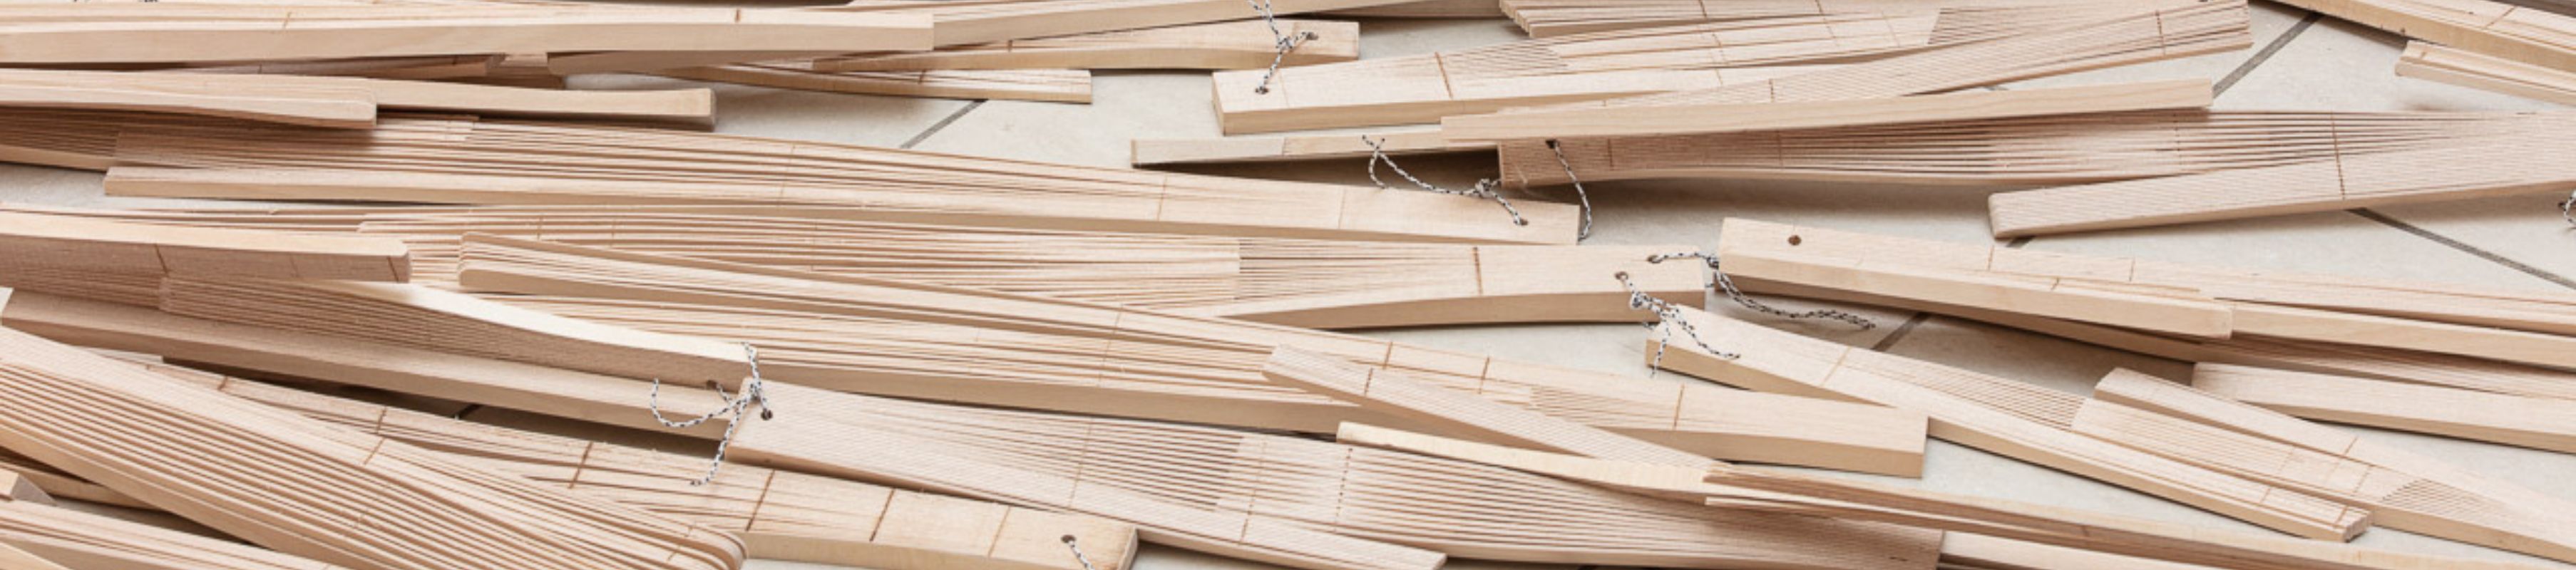 detail of Project Atrium: Muad Cotter, which featured small sheets of wood held together in bundles with string